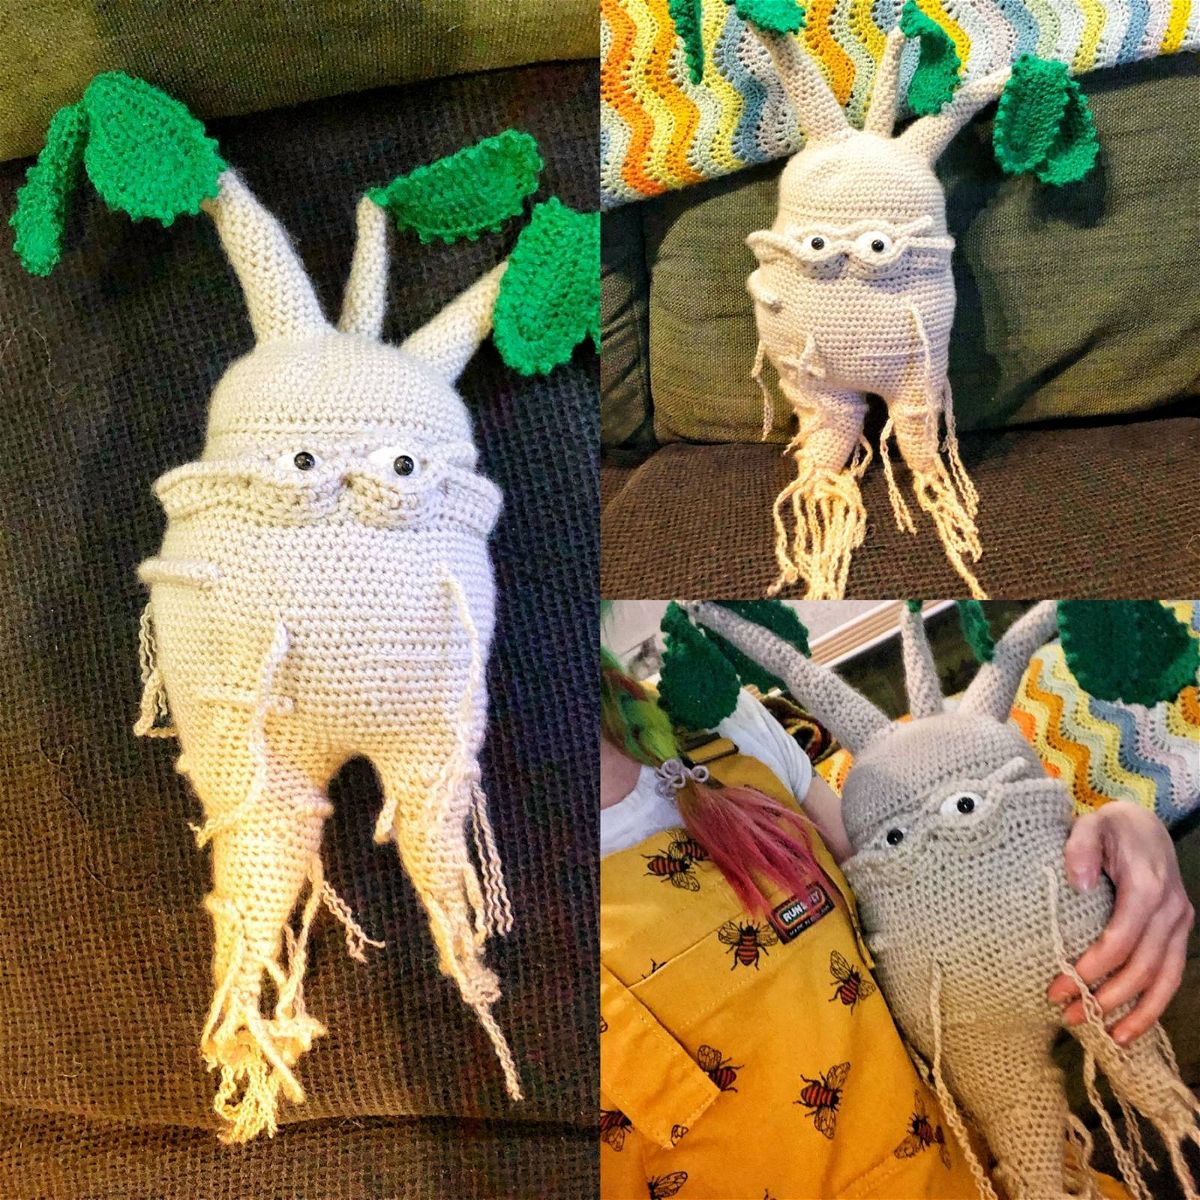 Amigurumi Mandrake Crochet Pattern Review by Vanessa Jones for Cottontail and Whiskers